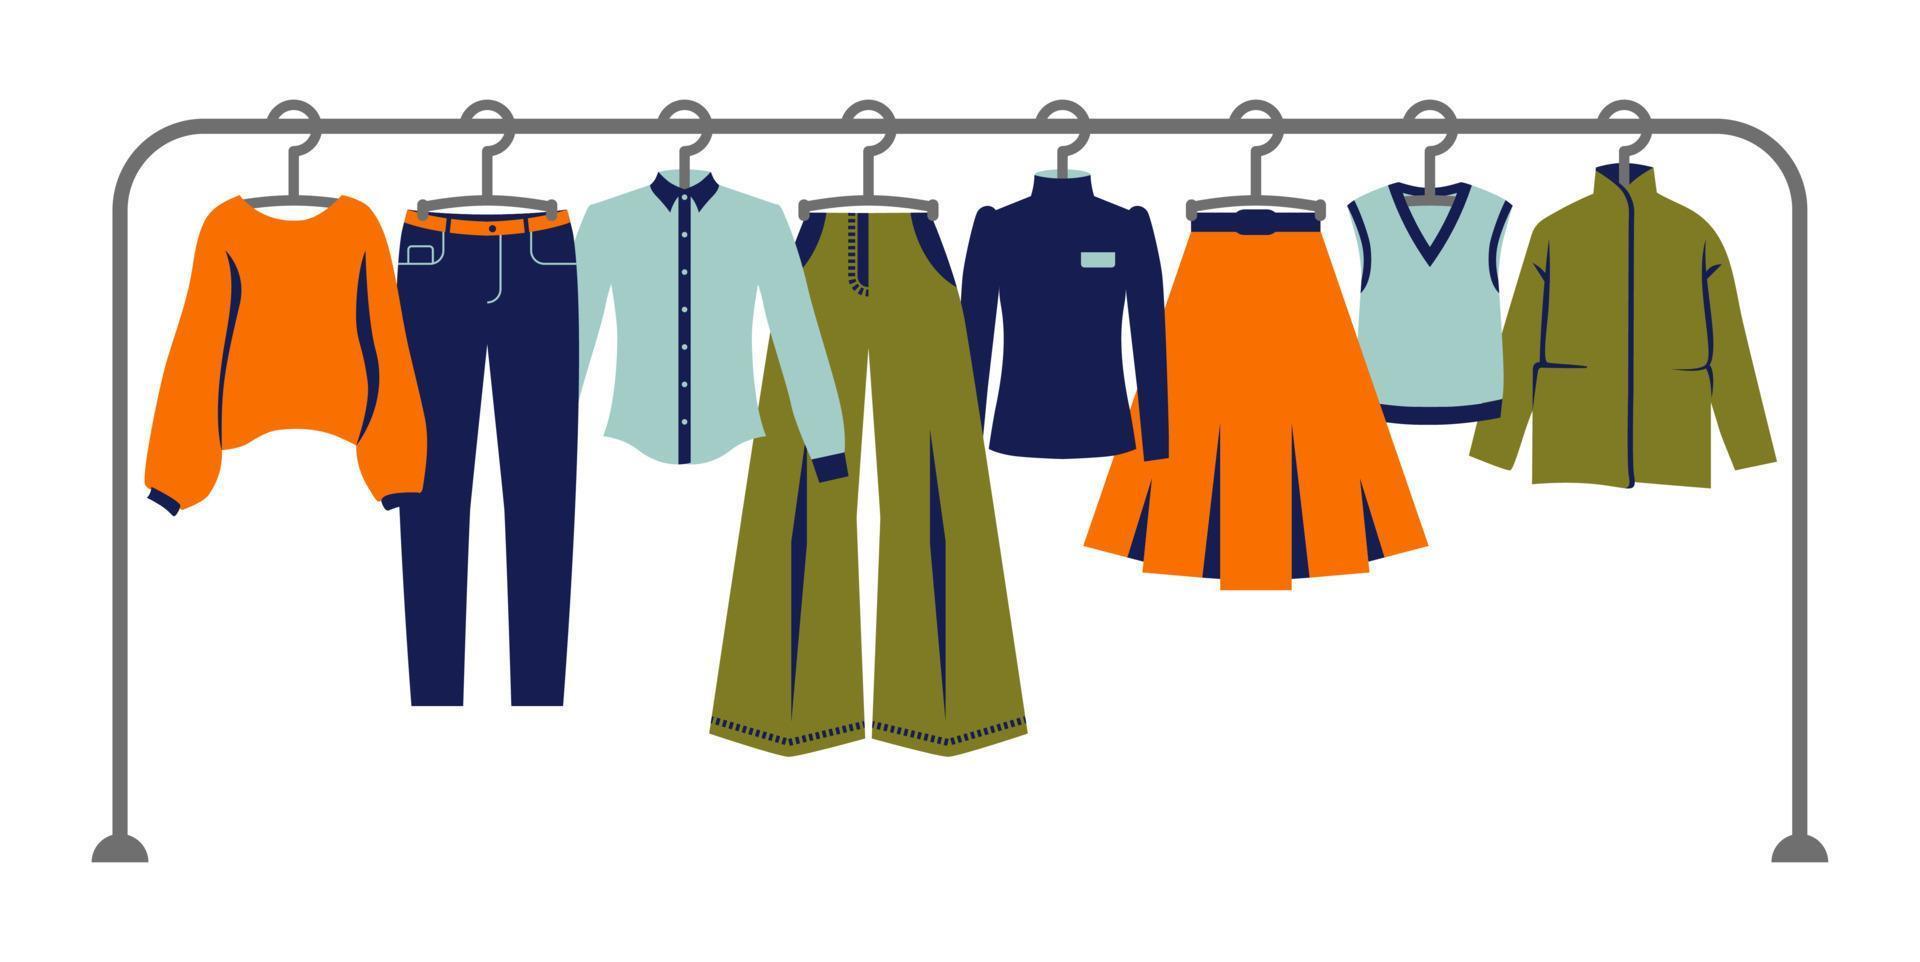 Flat vector illustration, set of women's clothes on a hanger